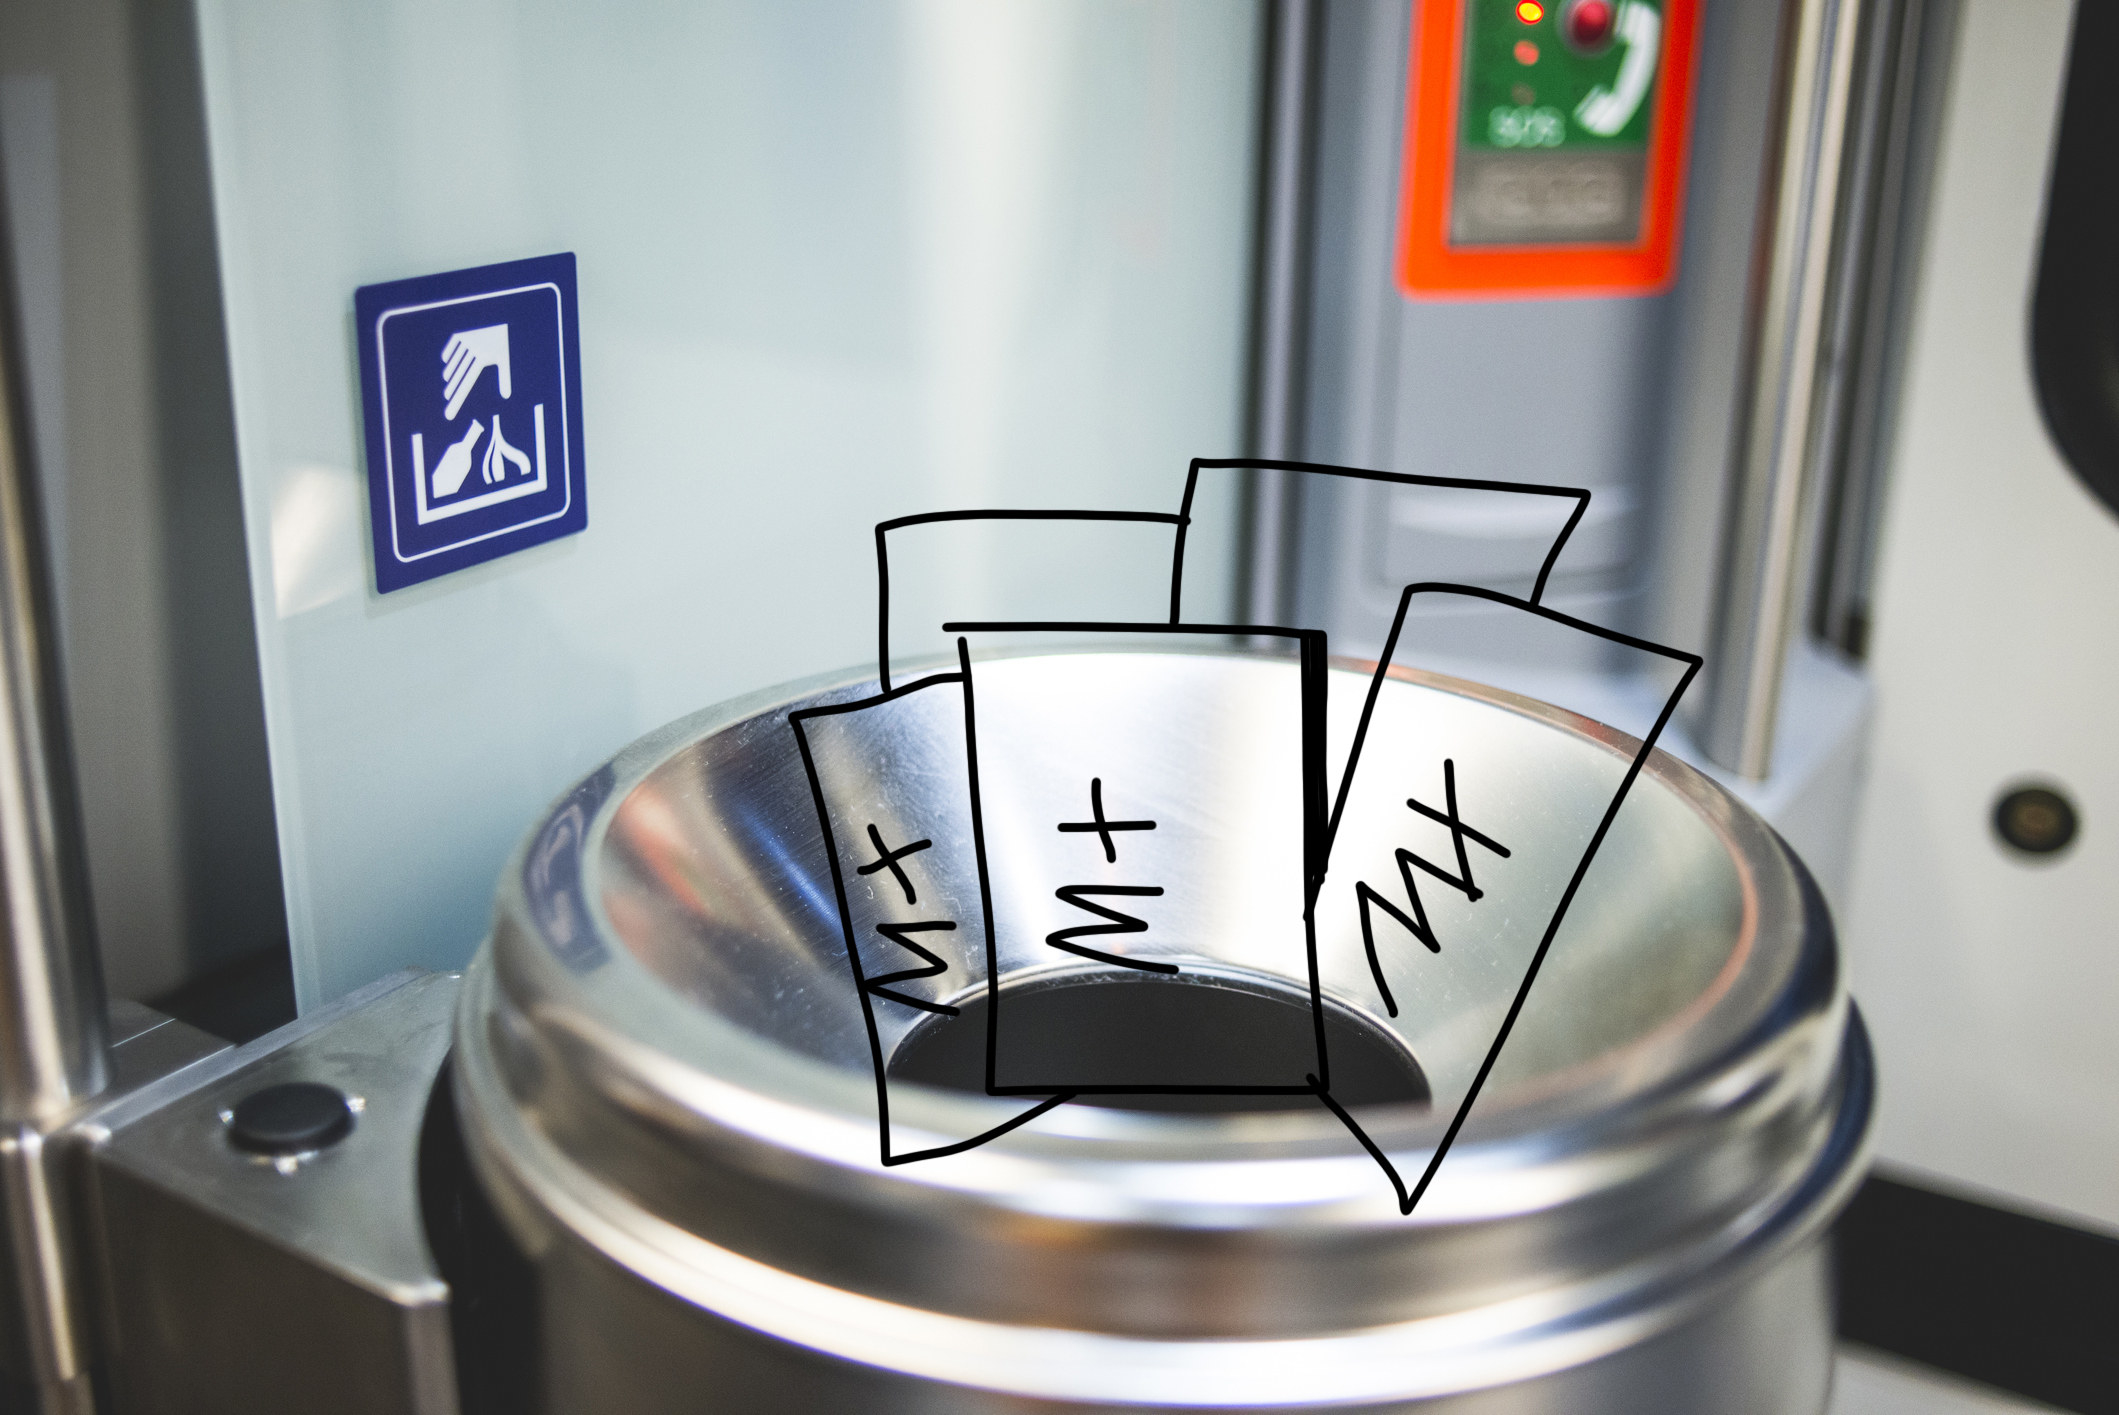 A stock photo of a bin at a train station with mX newspapers drawn in 